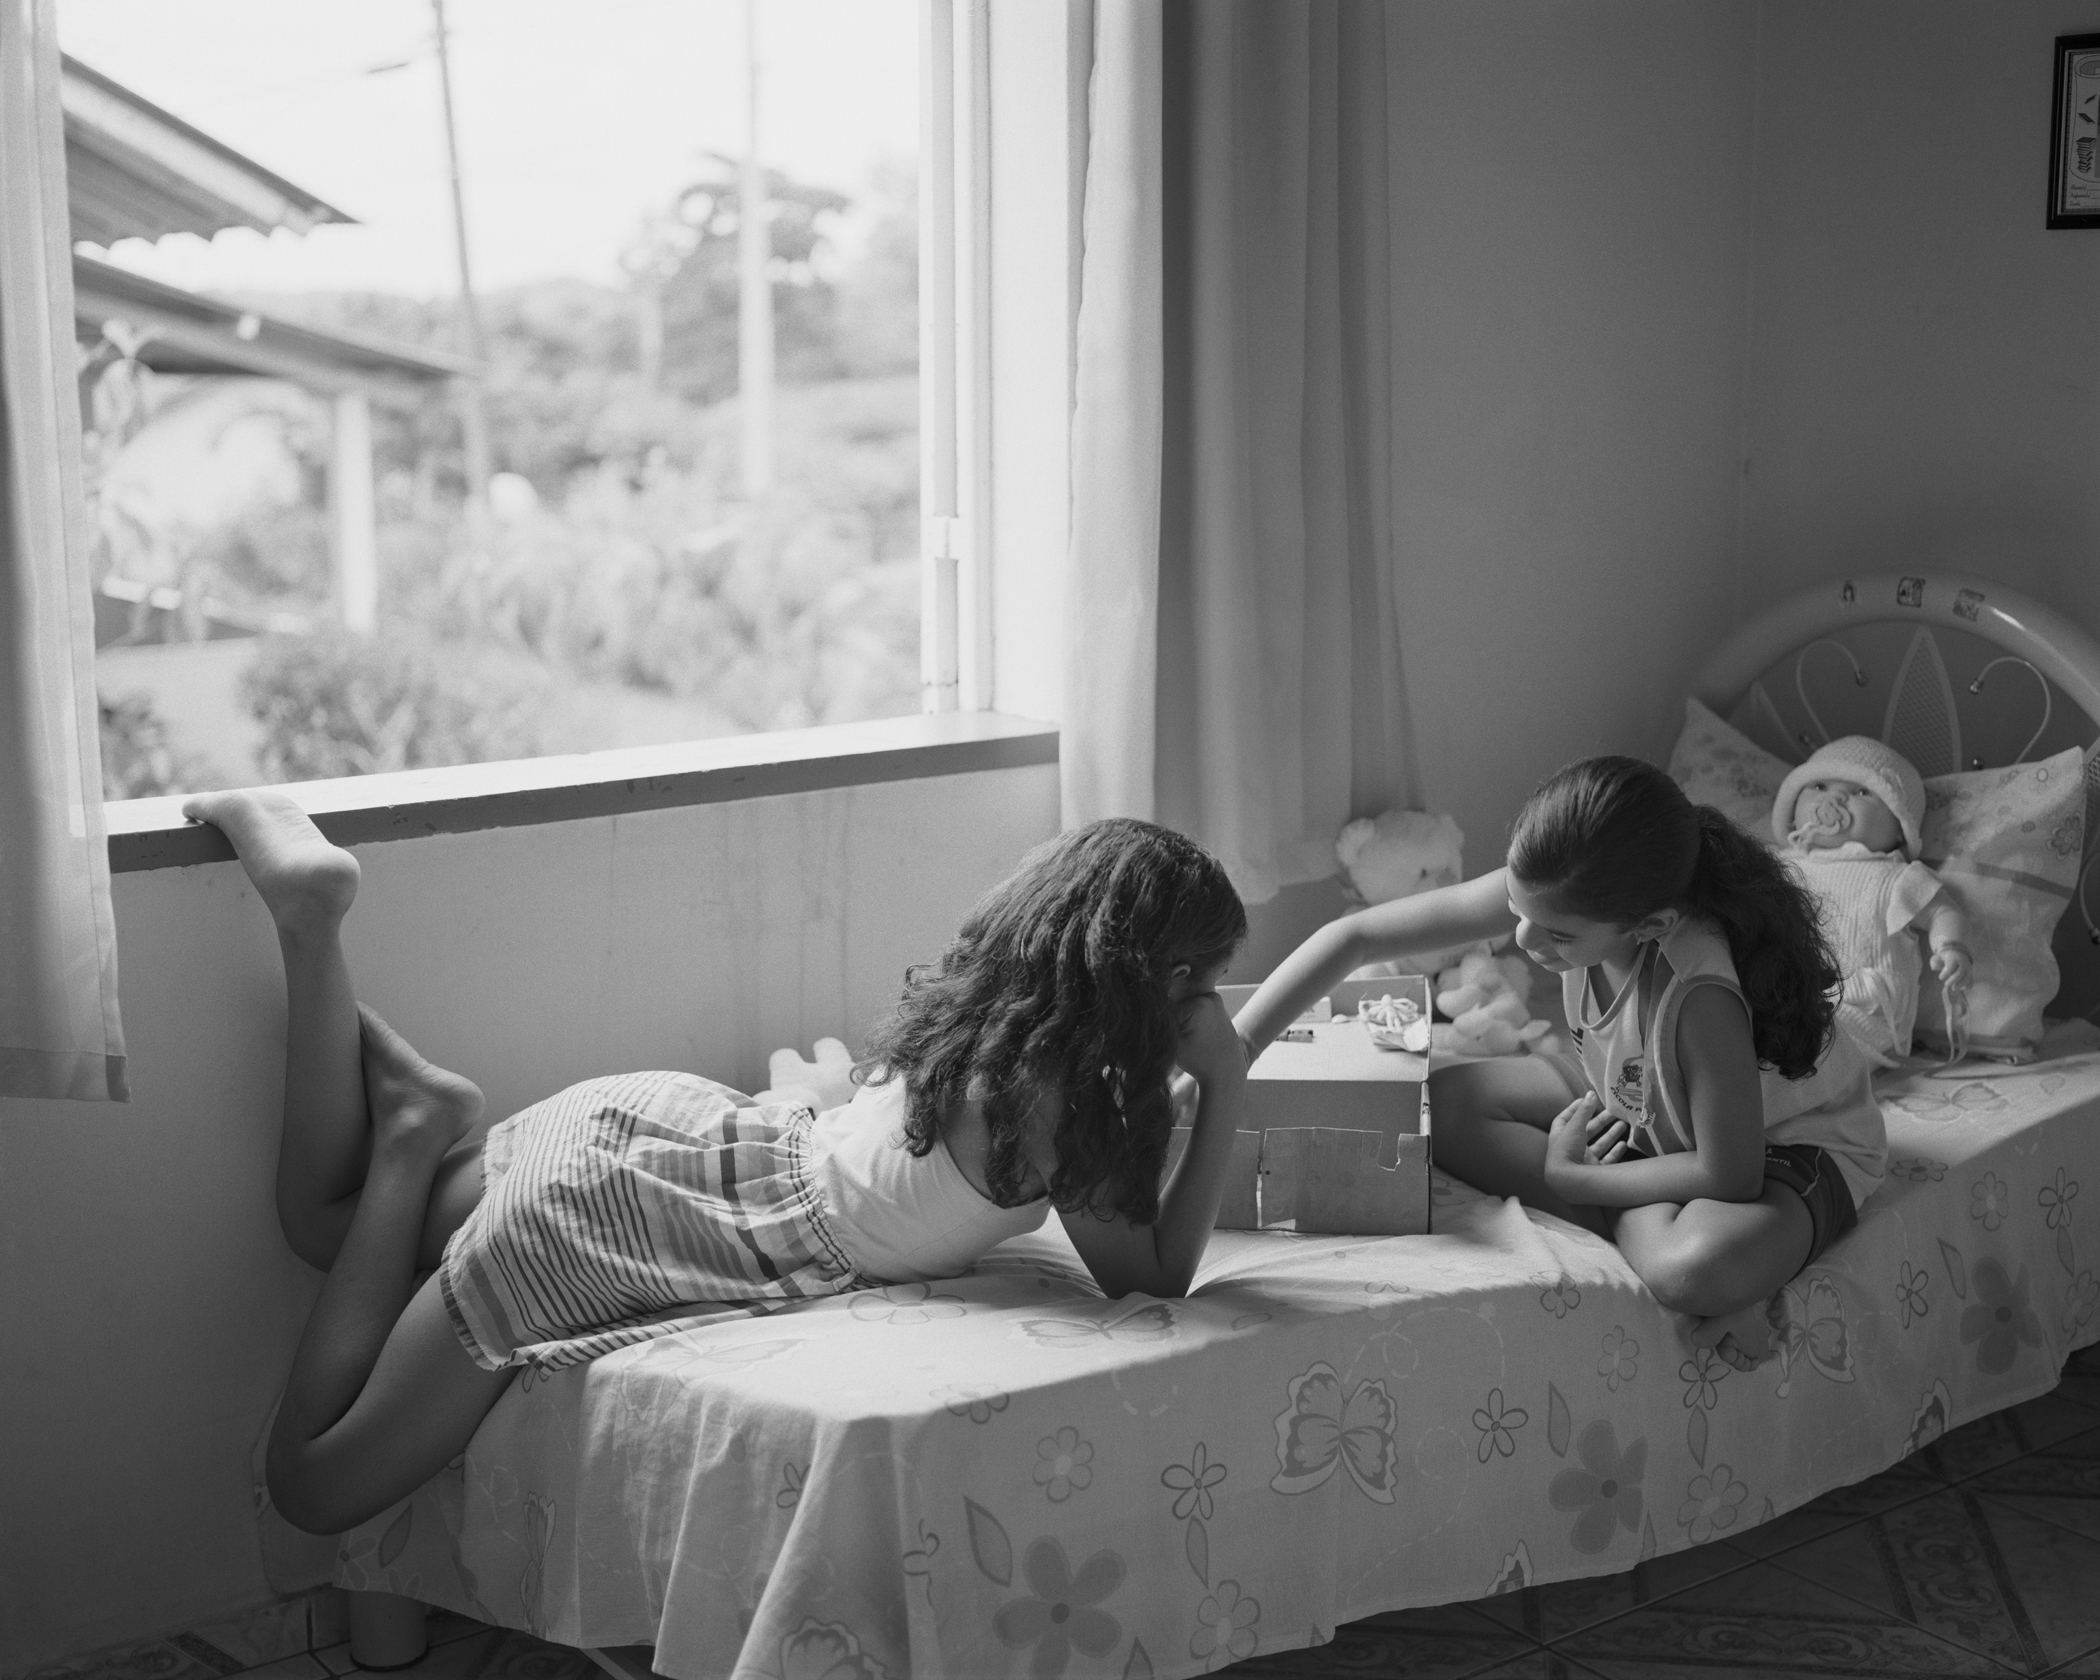  Ivna and Lara playing house inside the Farias family home at company housing complex Vila 4, April, 2014, Michelin Rubber Plantation, Bahia, Brazil. 2014/2018  